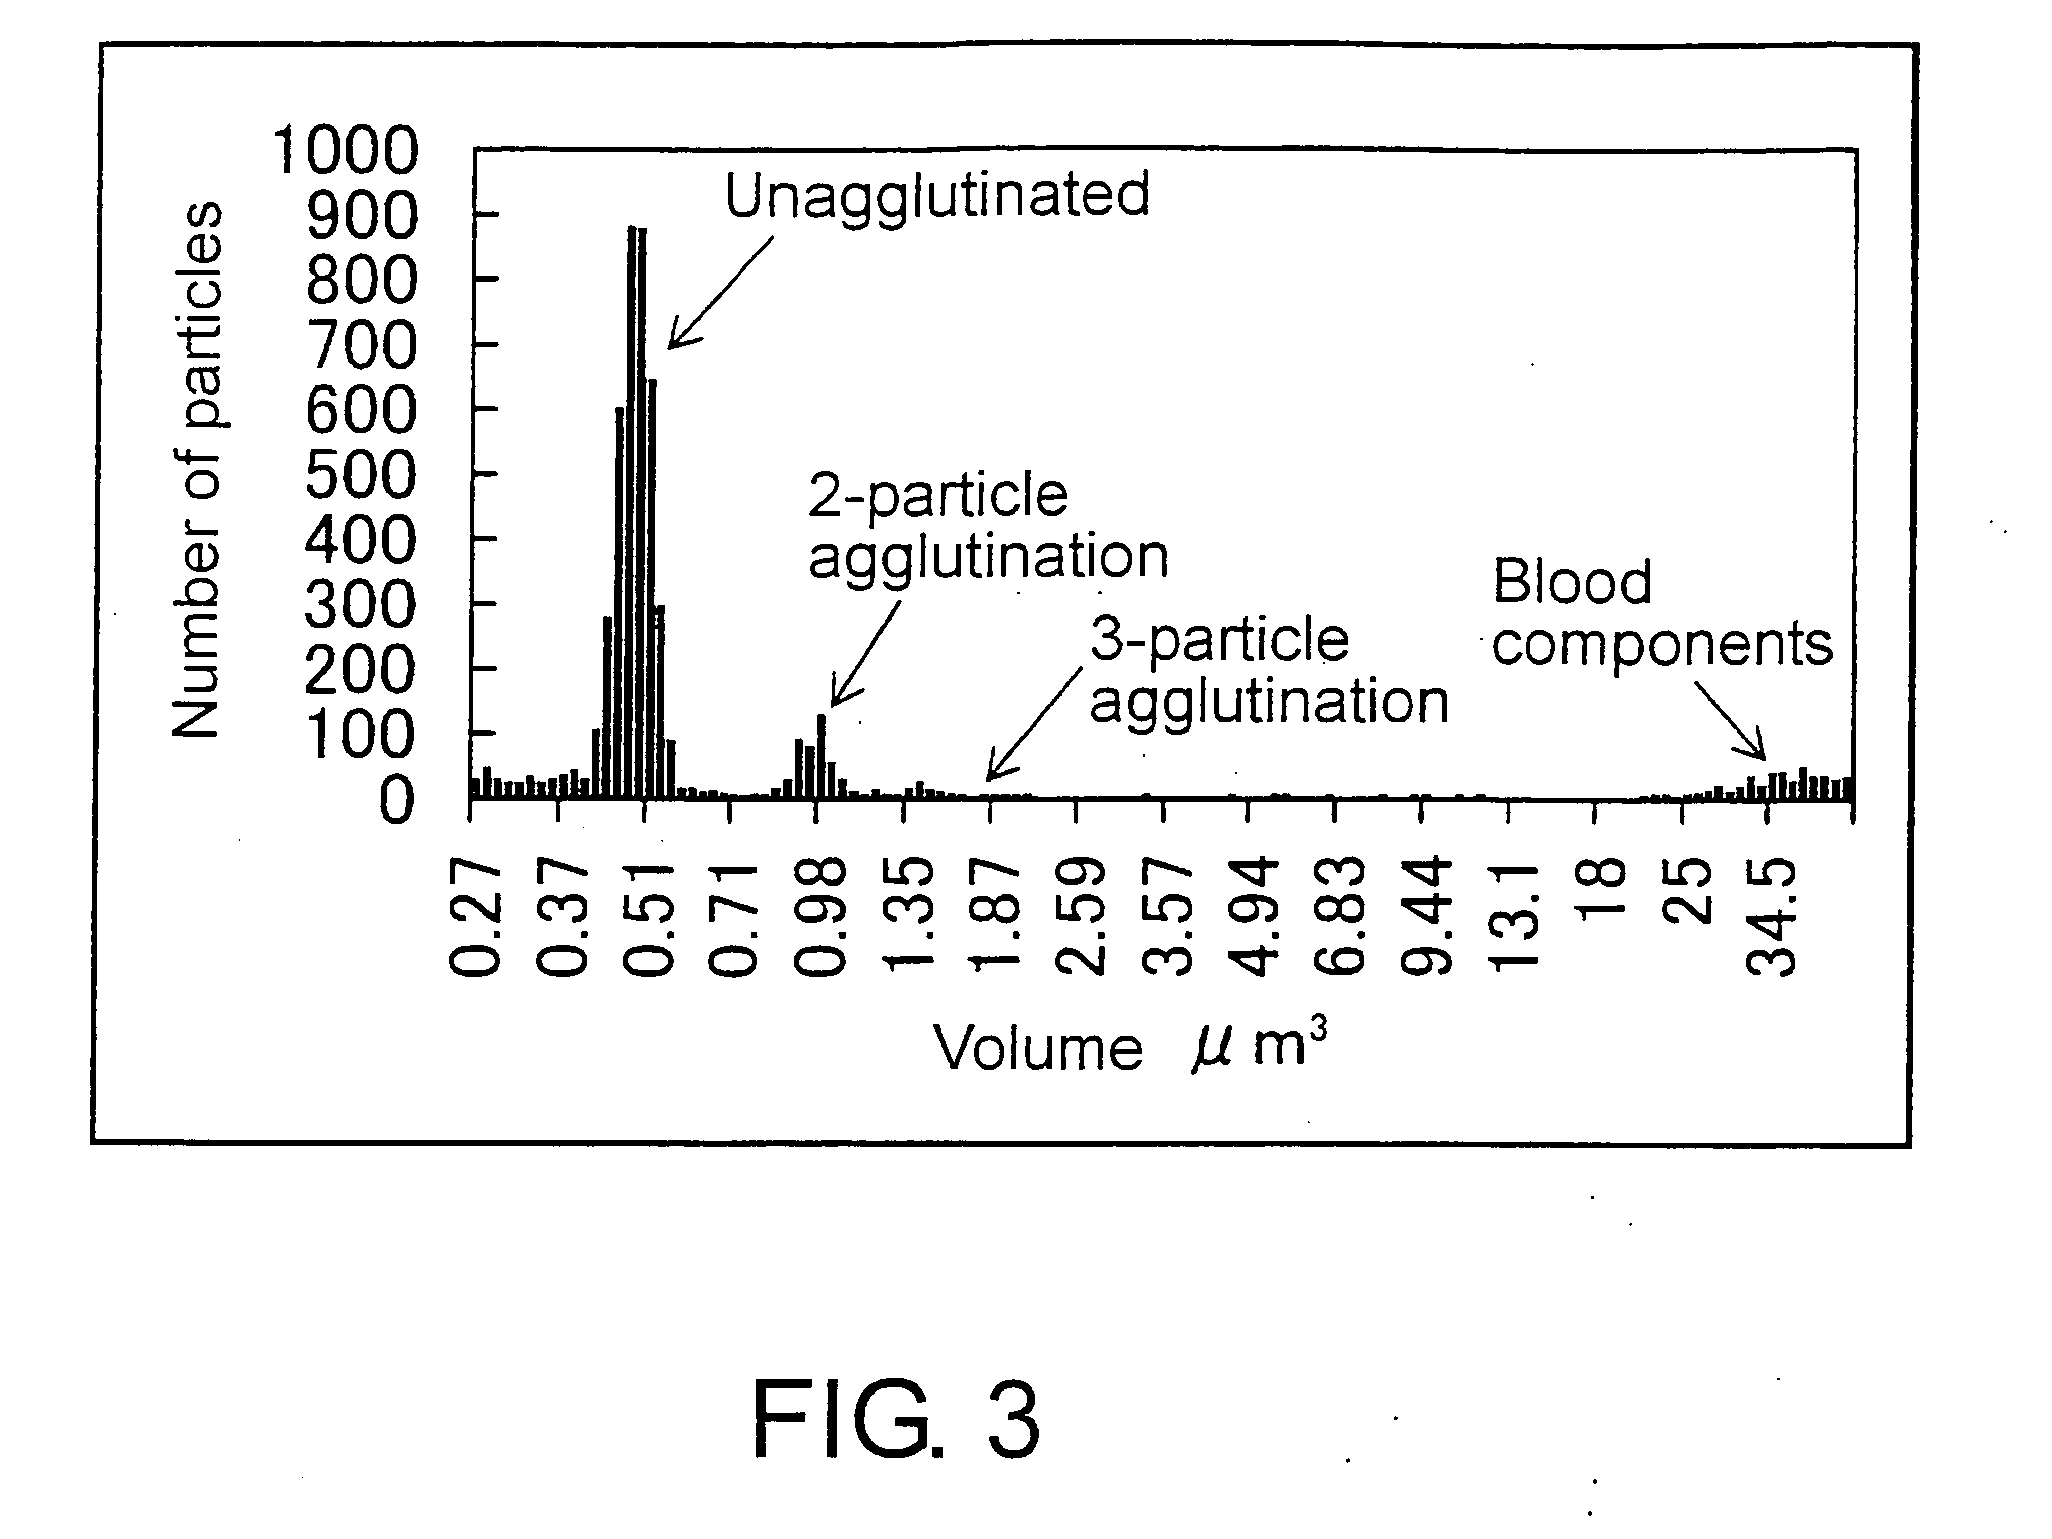 Methods for Measuring Affinity Substances in Samples Containing Blood Cell Components